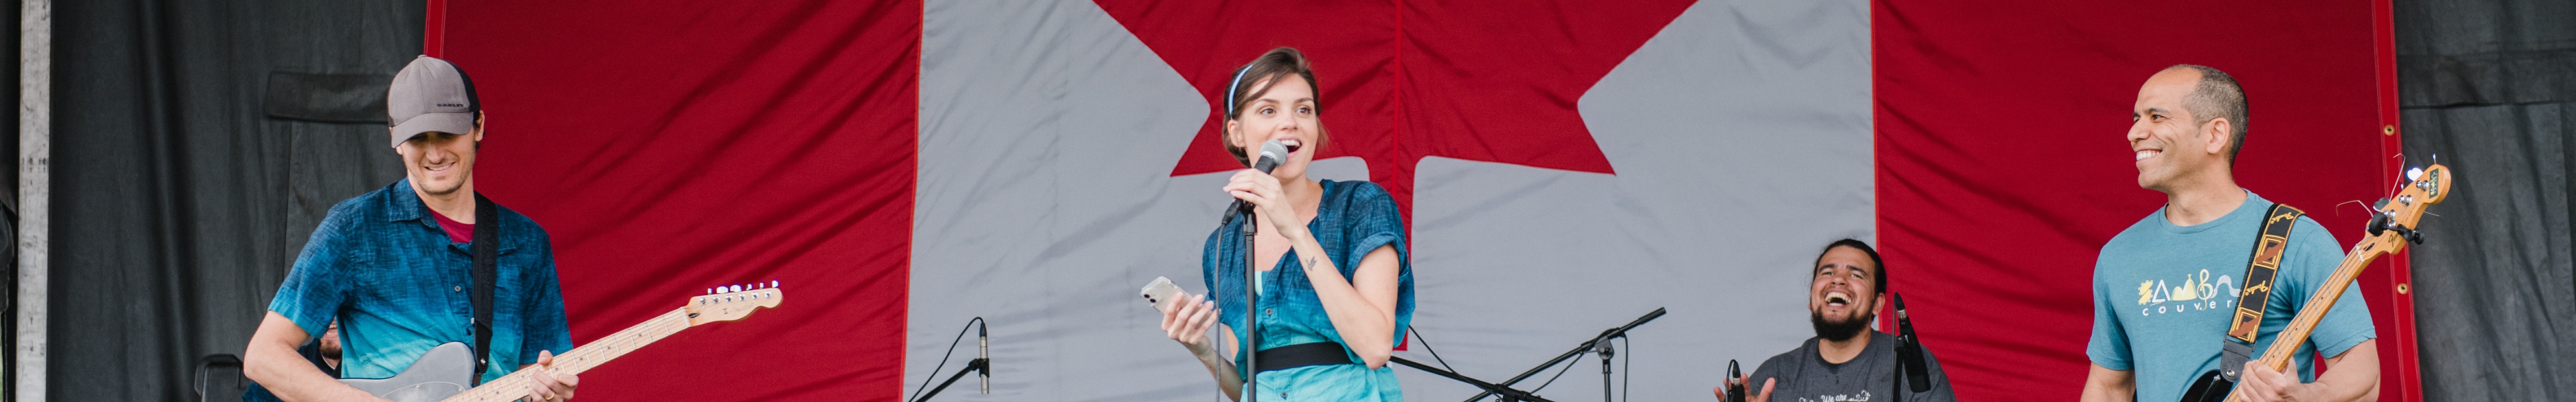 The image depicts a group of people performing on the main stage of a festival. The group includes a drummer, guitarist, bass player, and singer, all holding microphones and smiling. A Canadian flag is visible in the background.